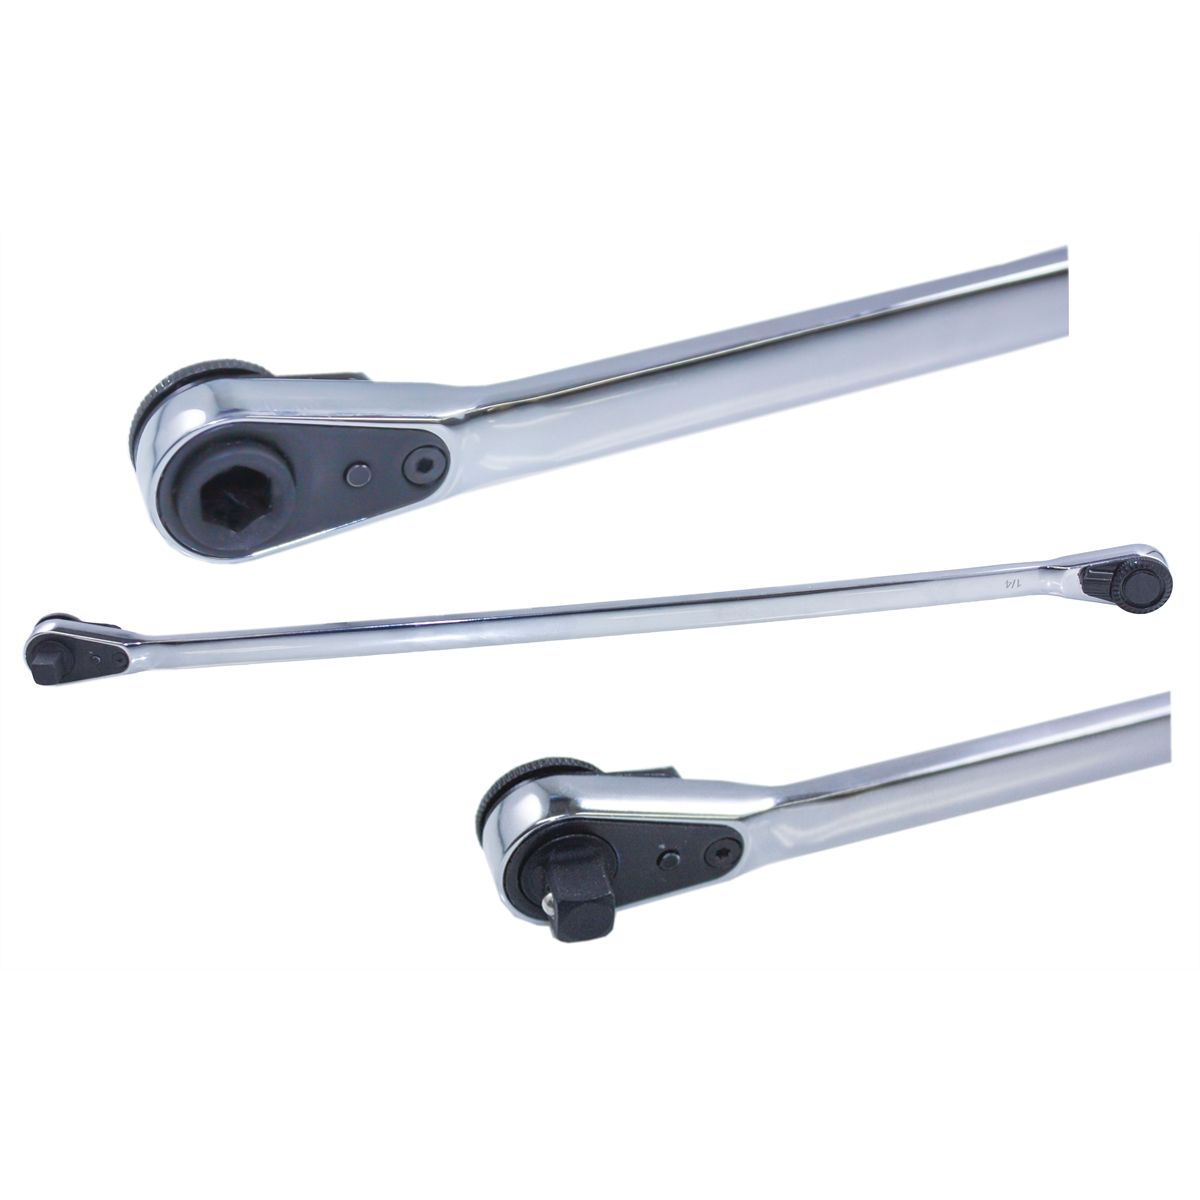 1/4 inch combination drive ratchet - offset fixed